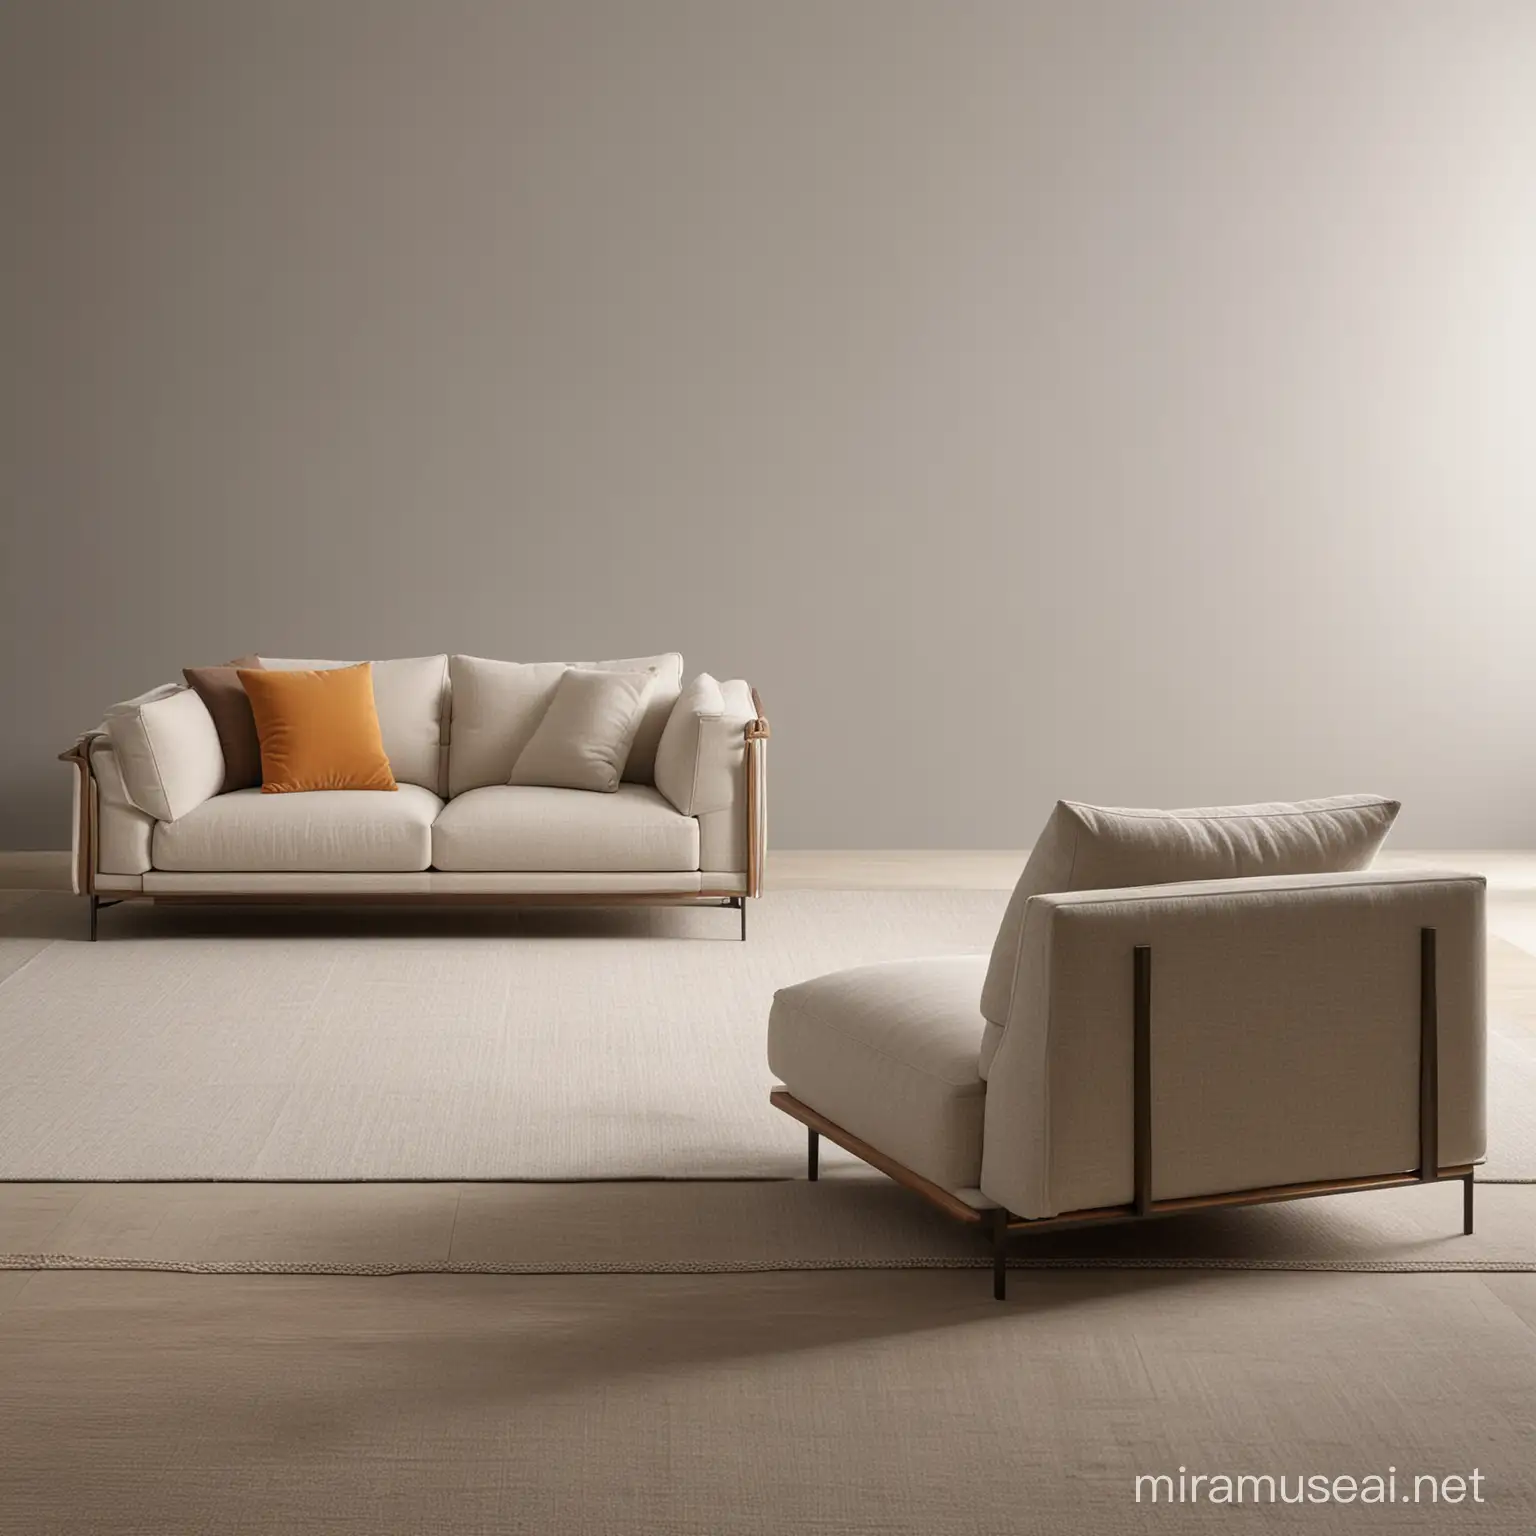 Modern Minimalist 3Seat Sofa with Creative Round Lines and New Fabric